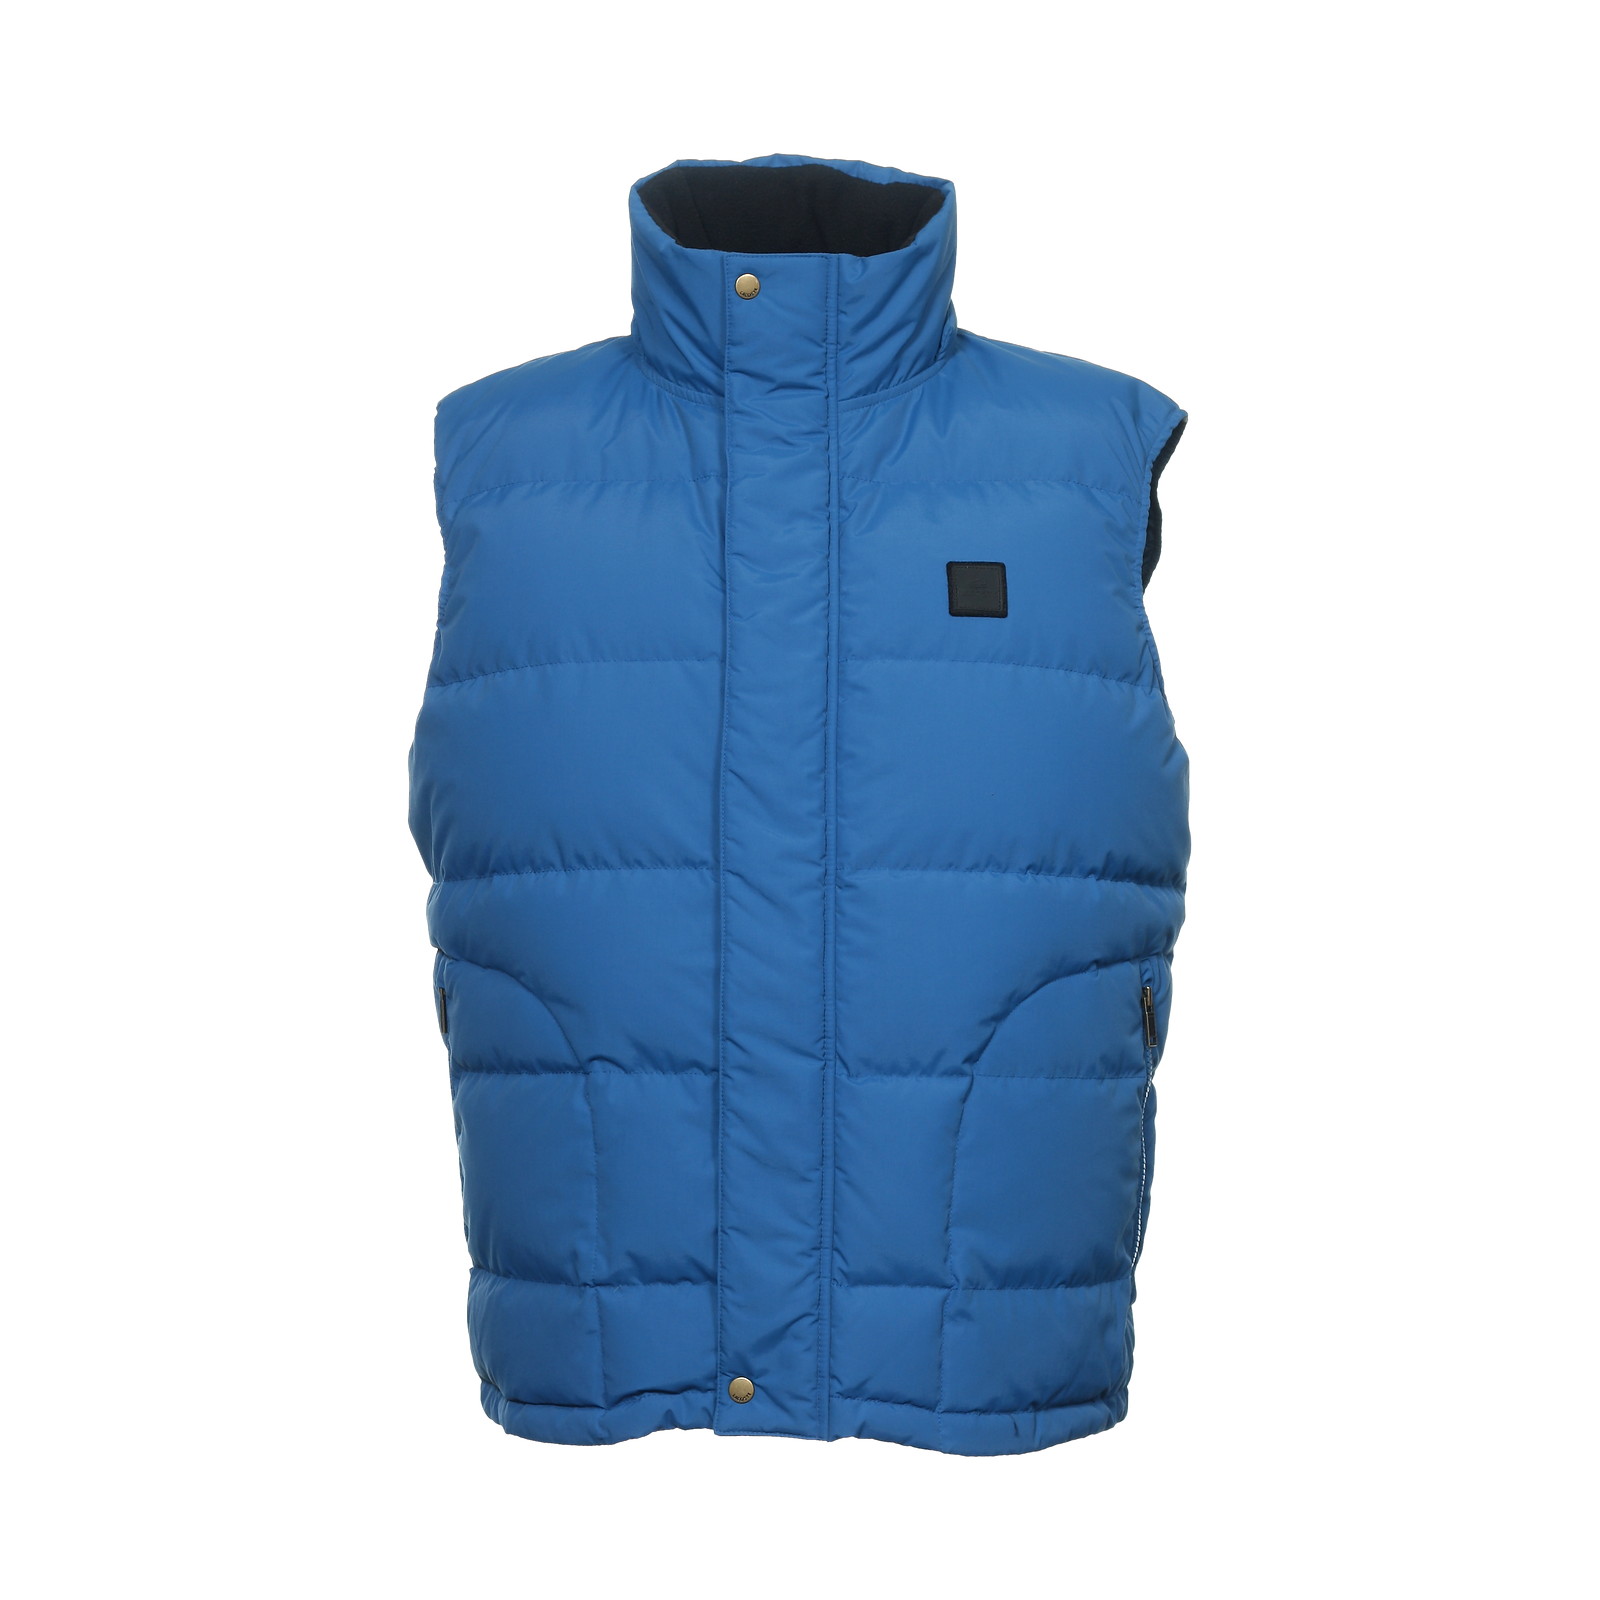 Lacoste Mens Blue Hooded Water Repellent Down Insulated Vest $225